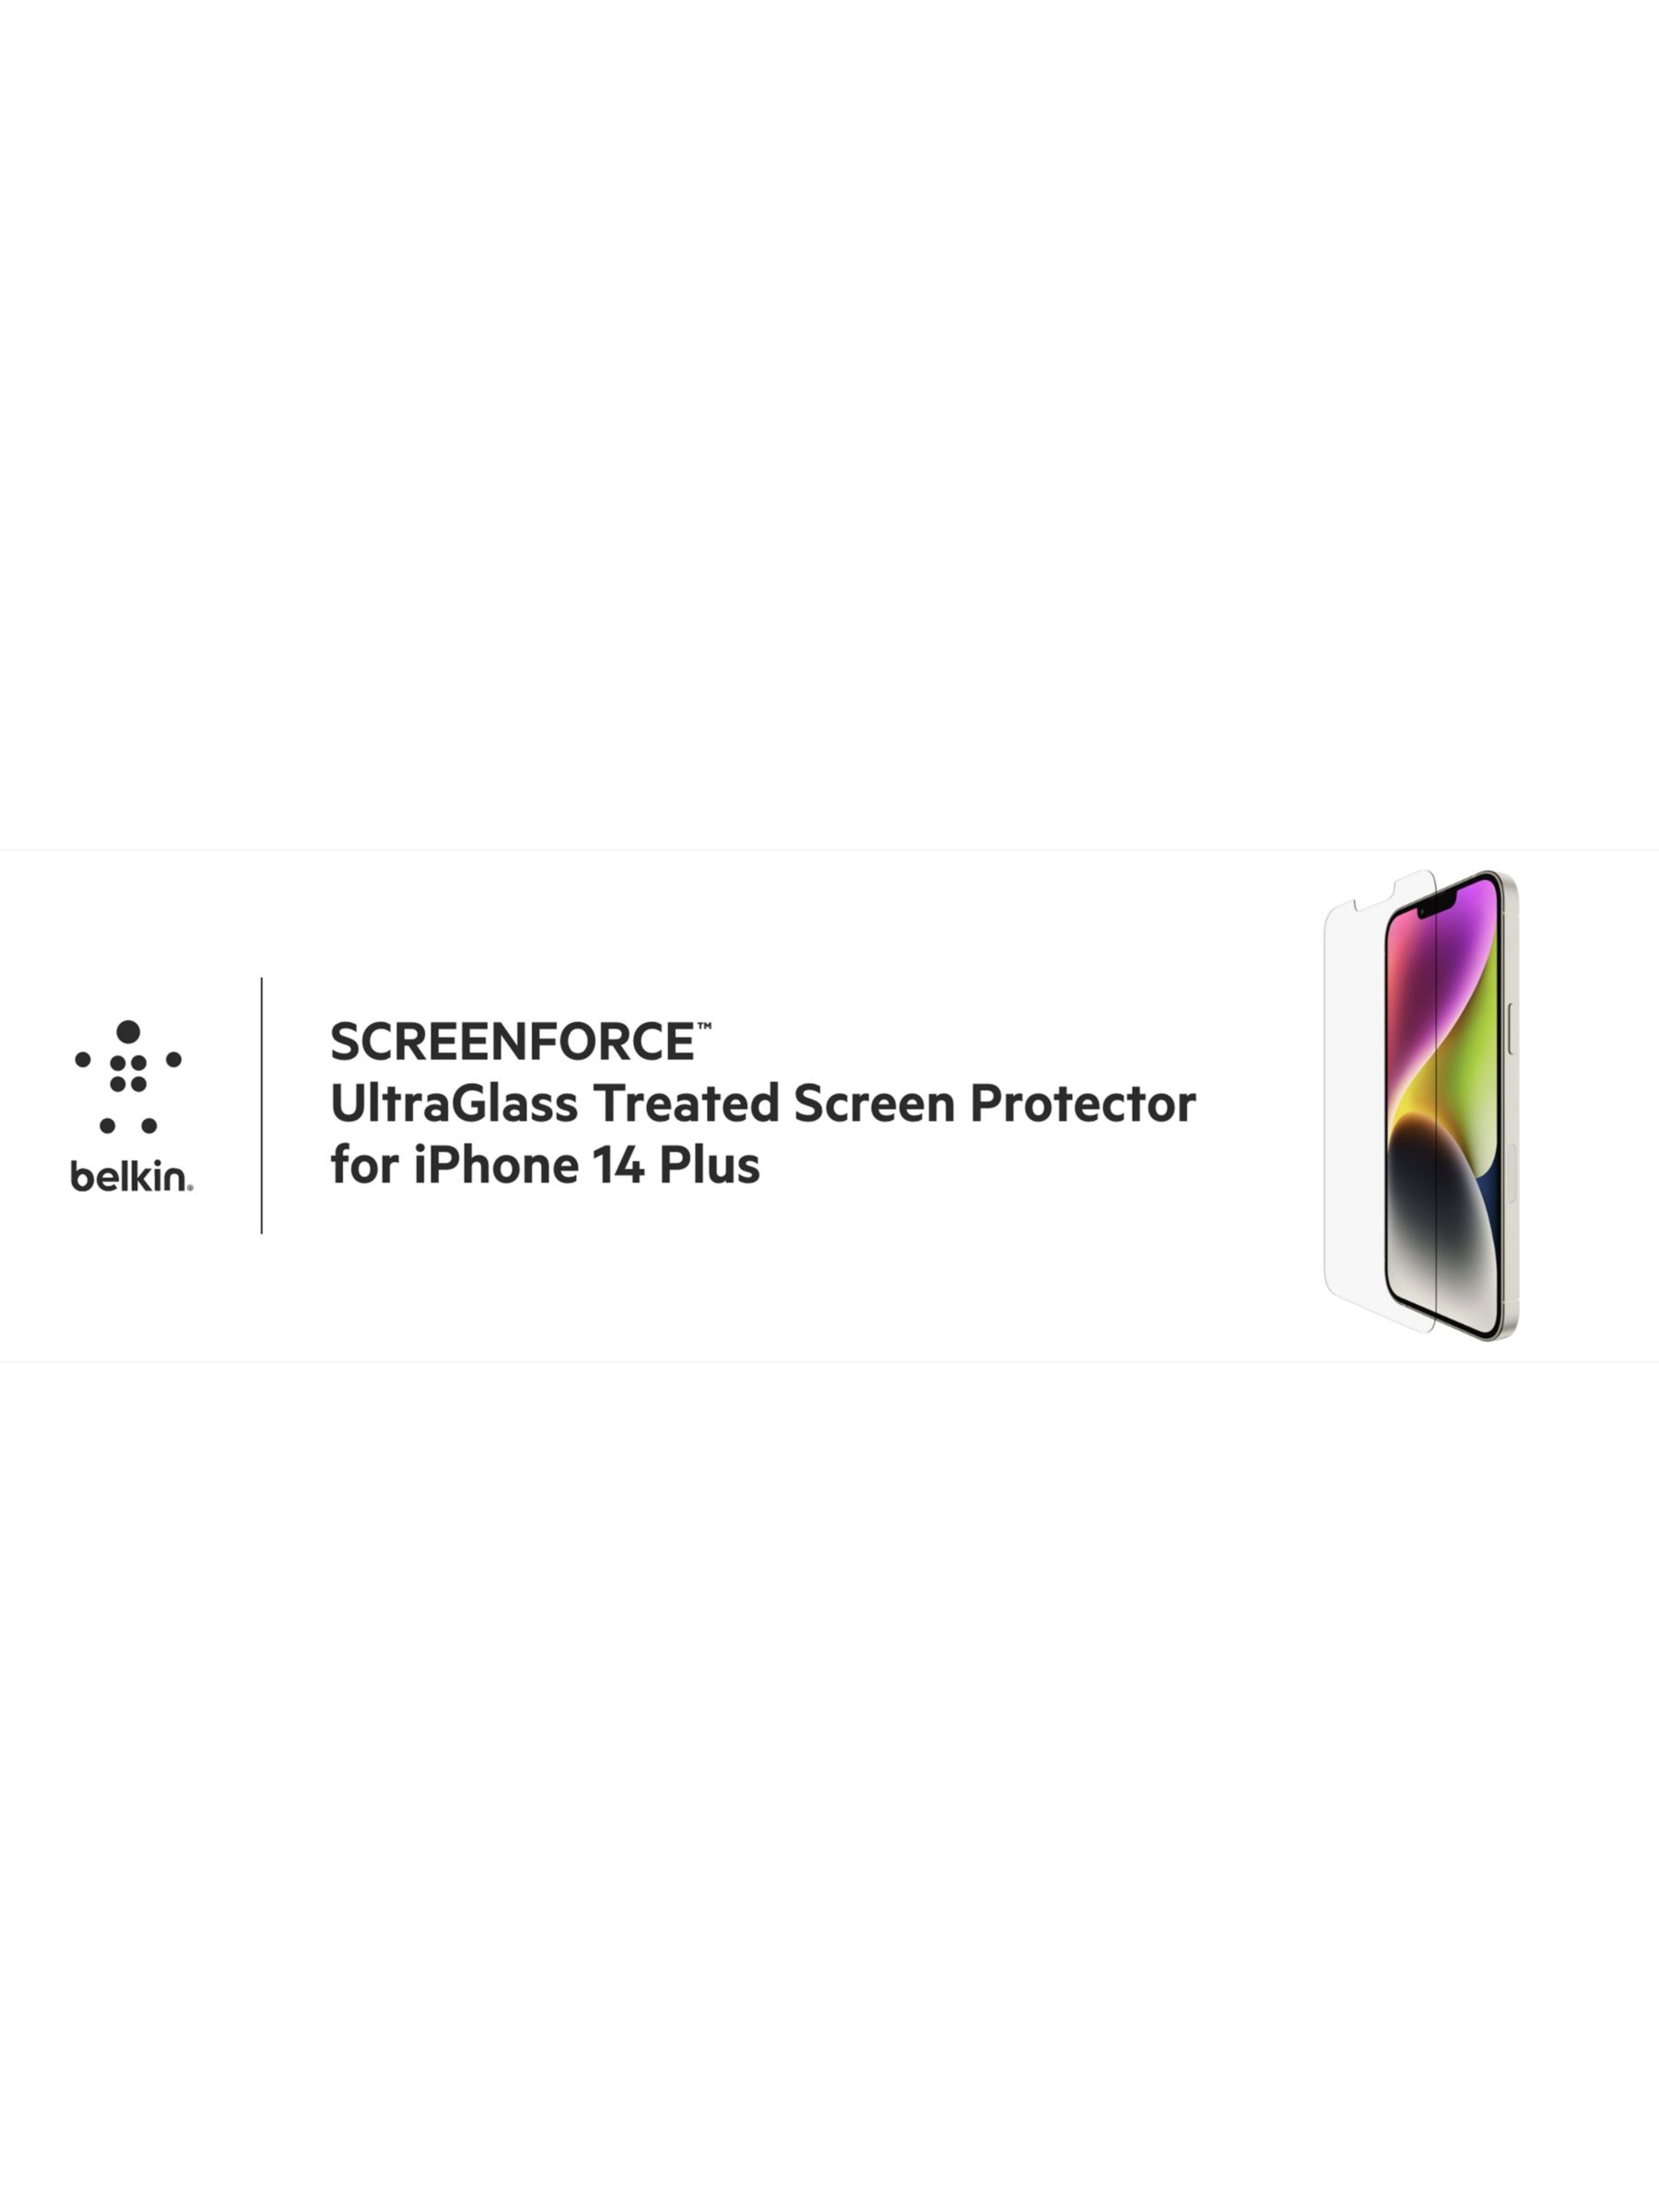 Shop UltraGlass Treated Screen Protector for iPhone 14 Pro | Belkin US